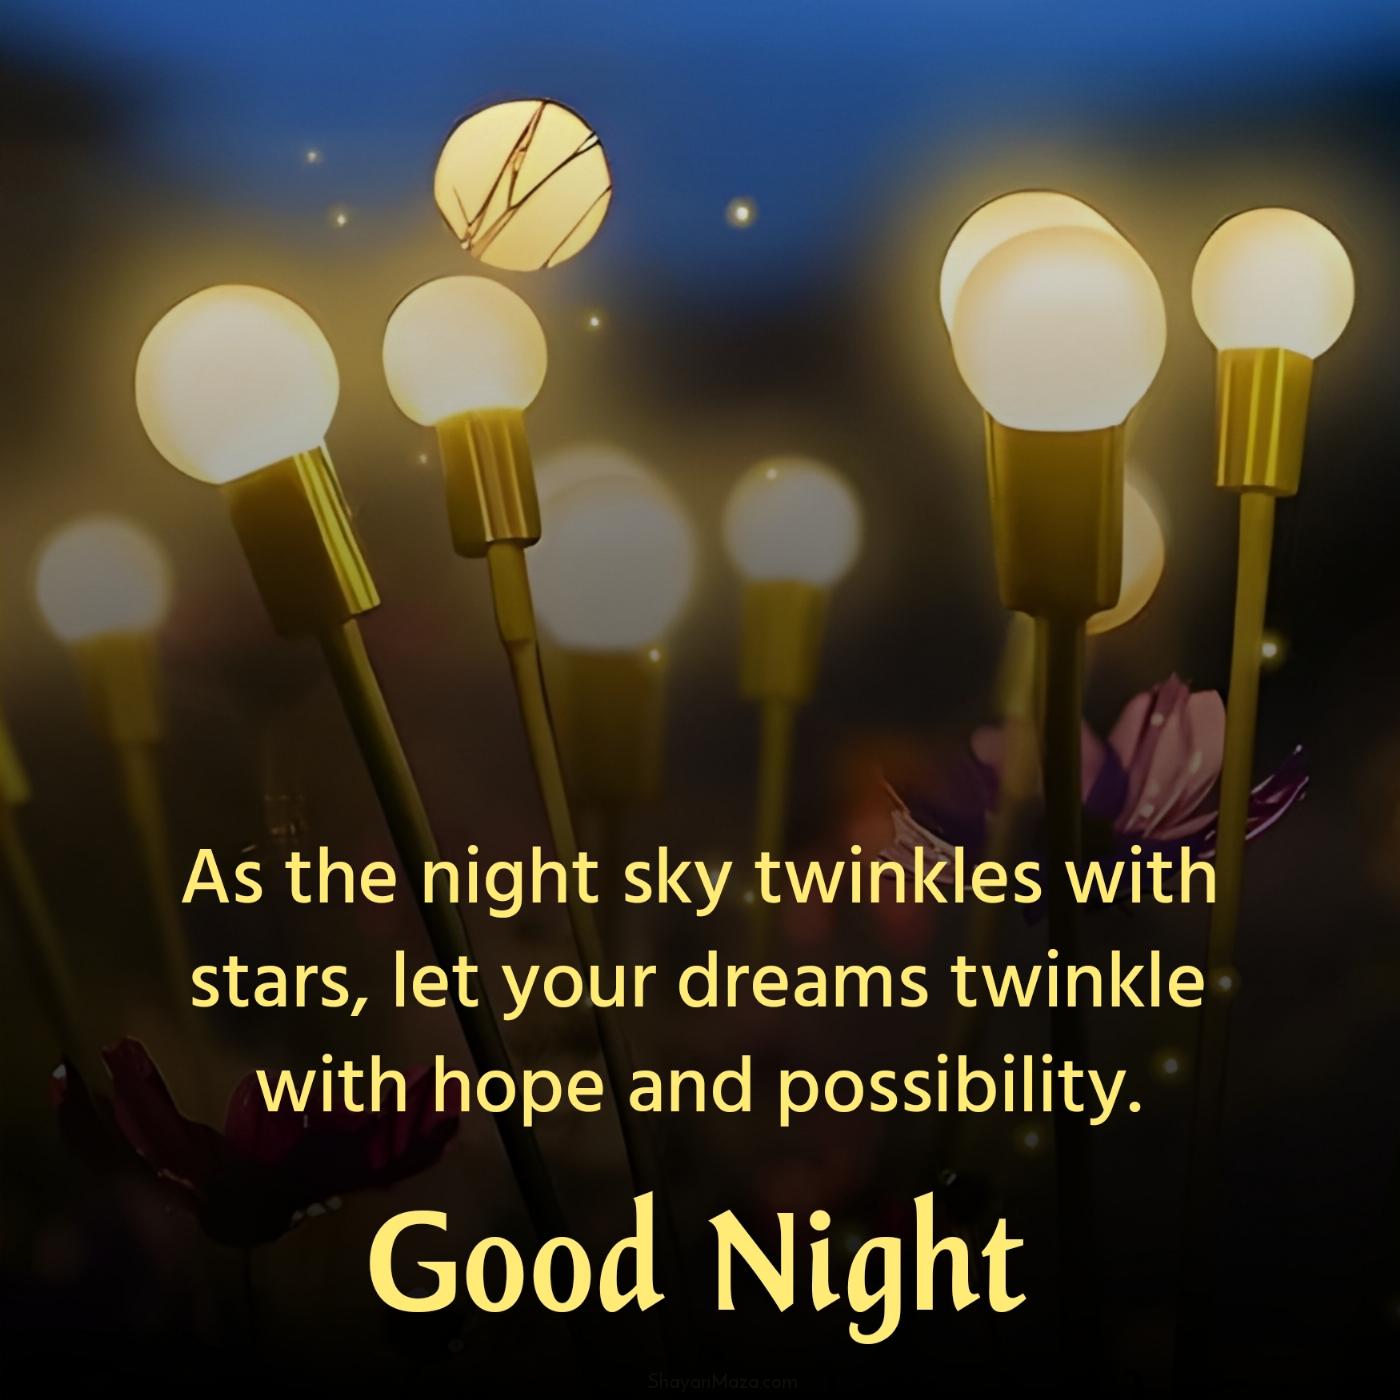 As the night sky twinkles with stars let your dreams